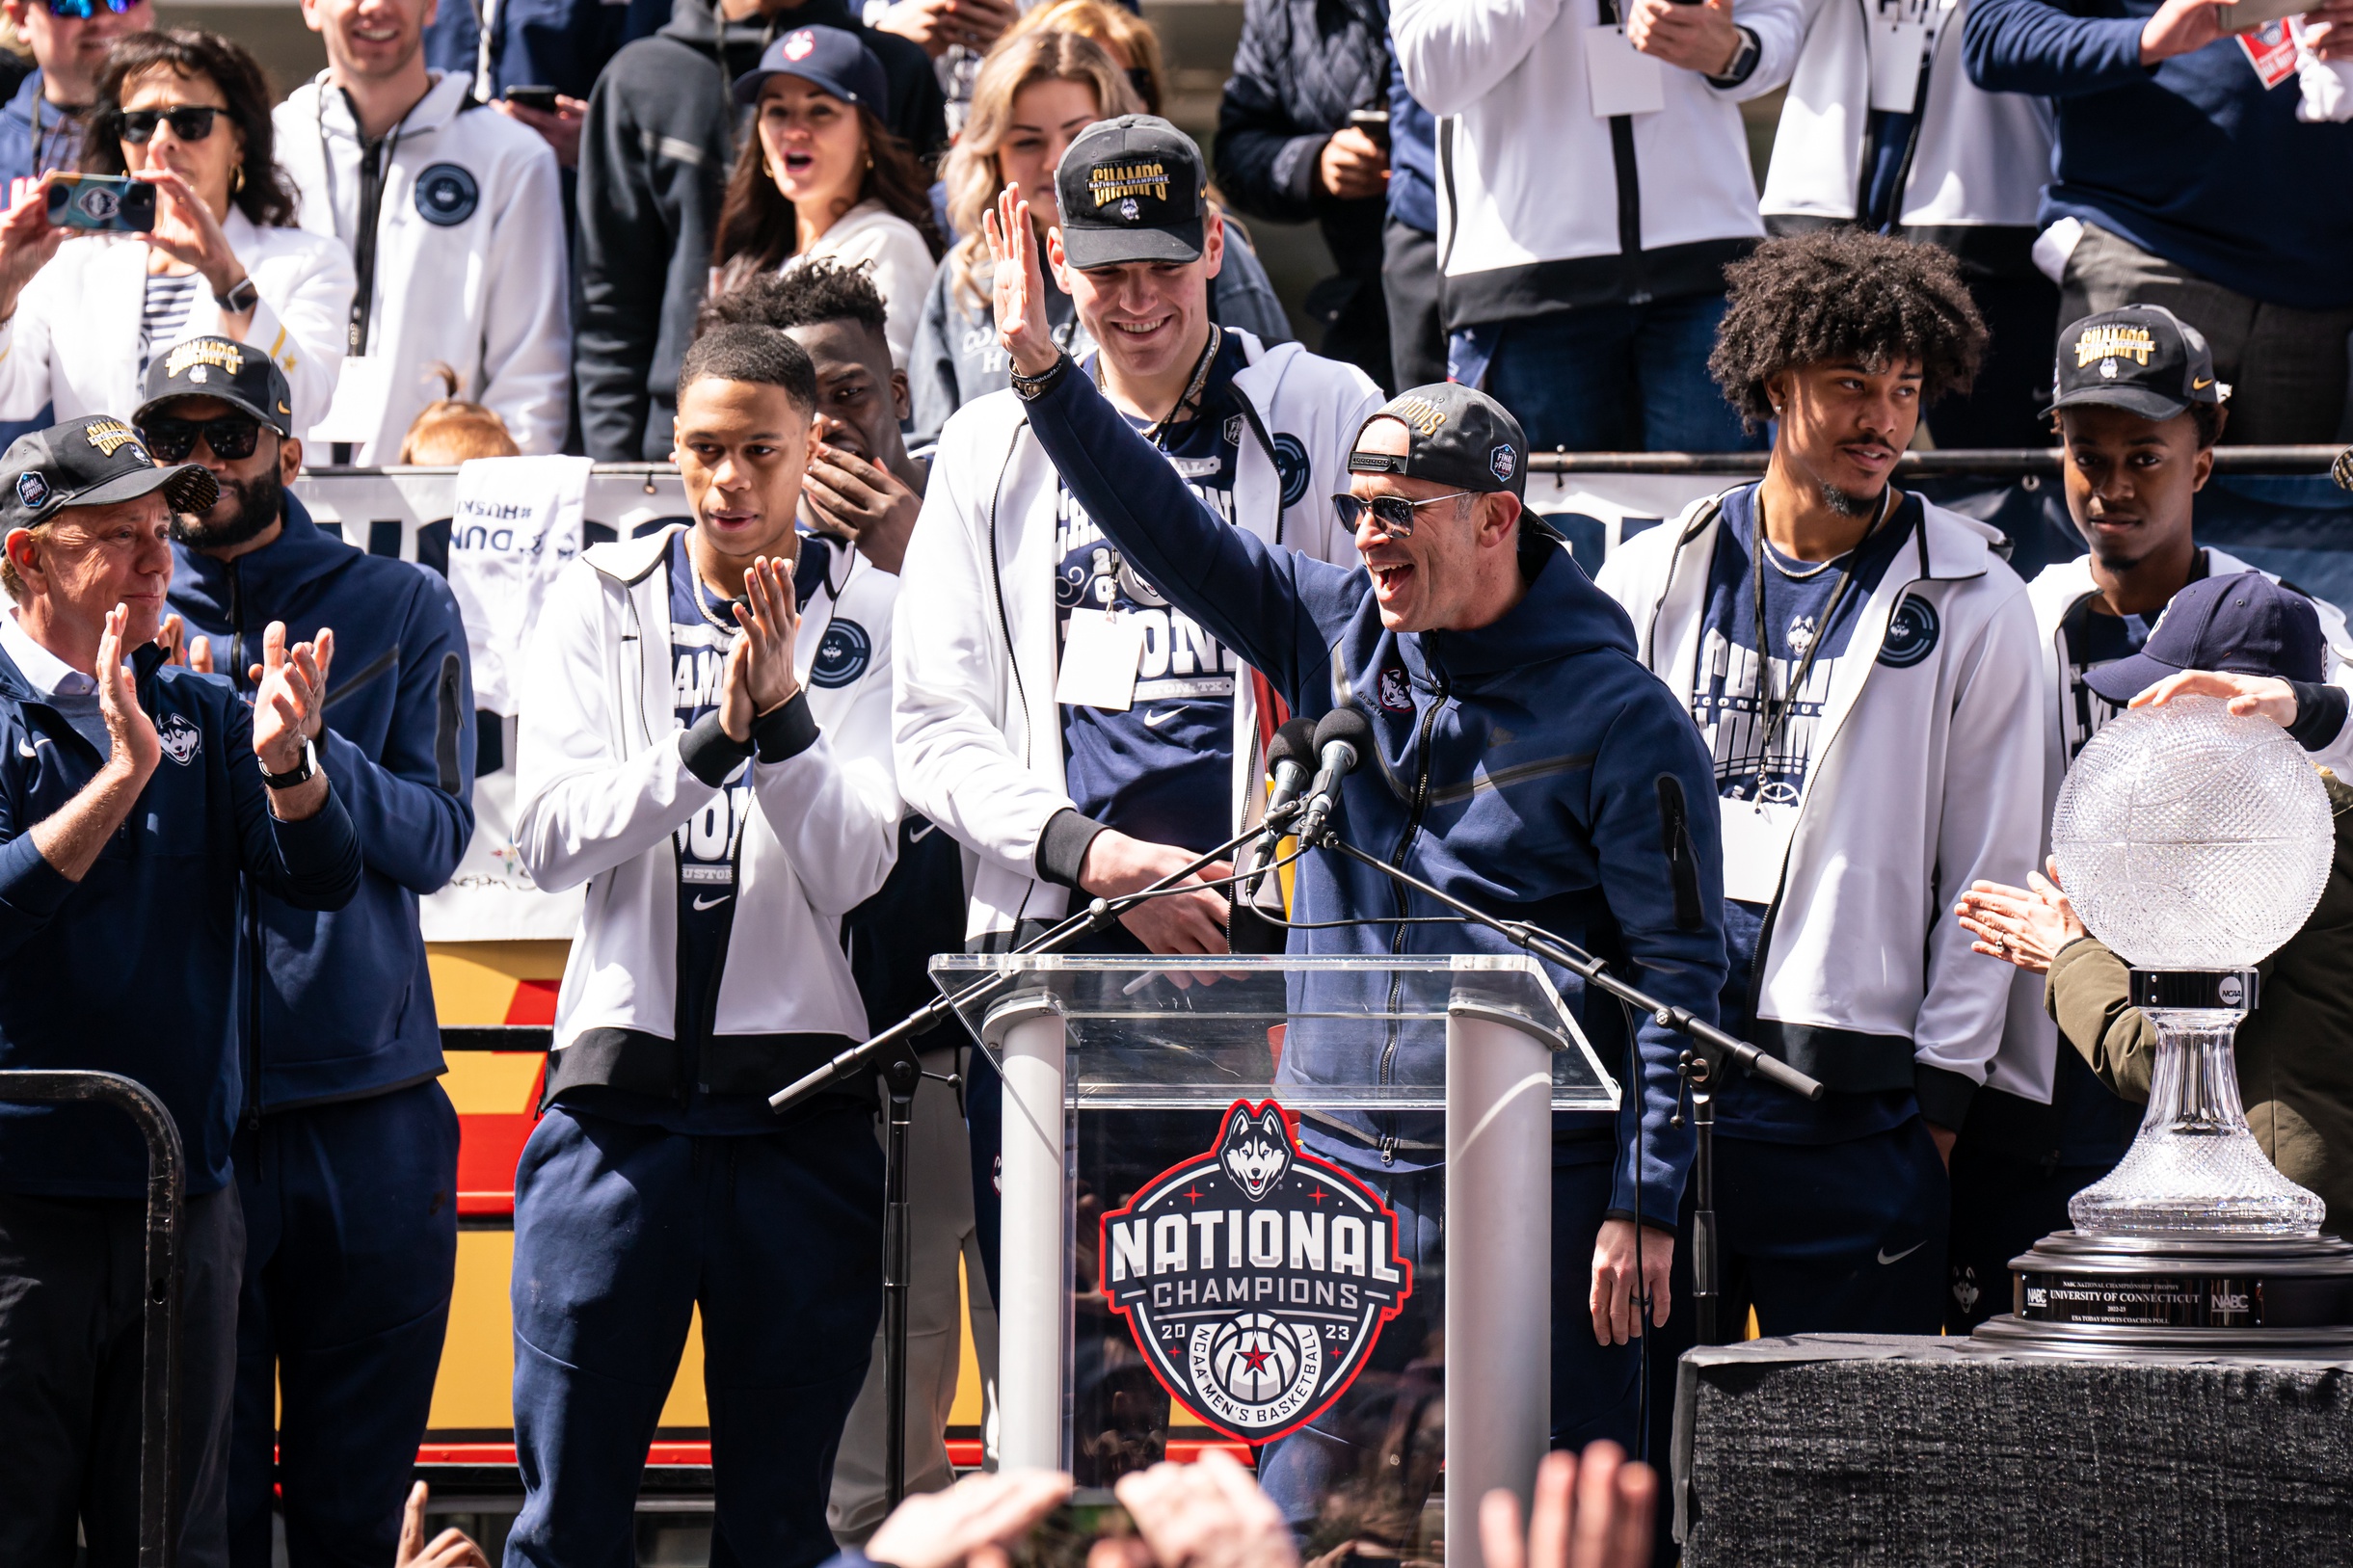 Apr 8, 2023; Hartford, CT, USA; UConn Huskies head coach Dan Hurley reacts to the crowd as he and the team are honored with a parade through downtown Hartford. Mandatory Credit: David Butler II-USA TODAY Sports